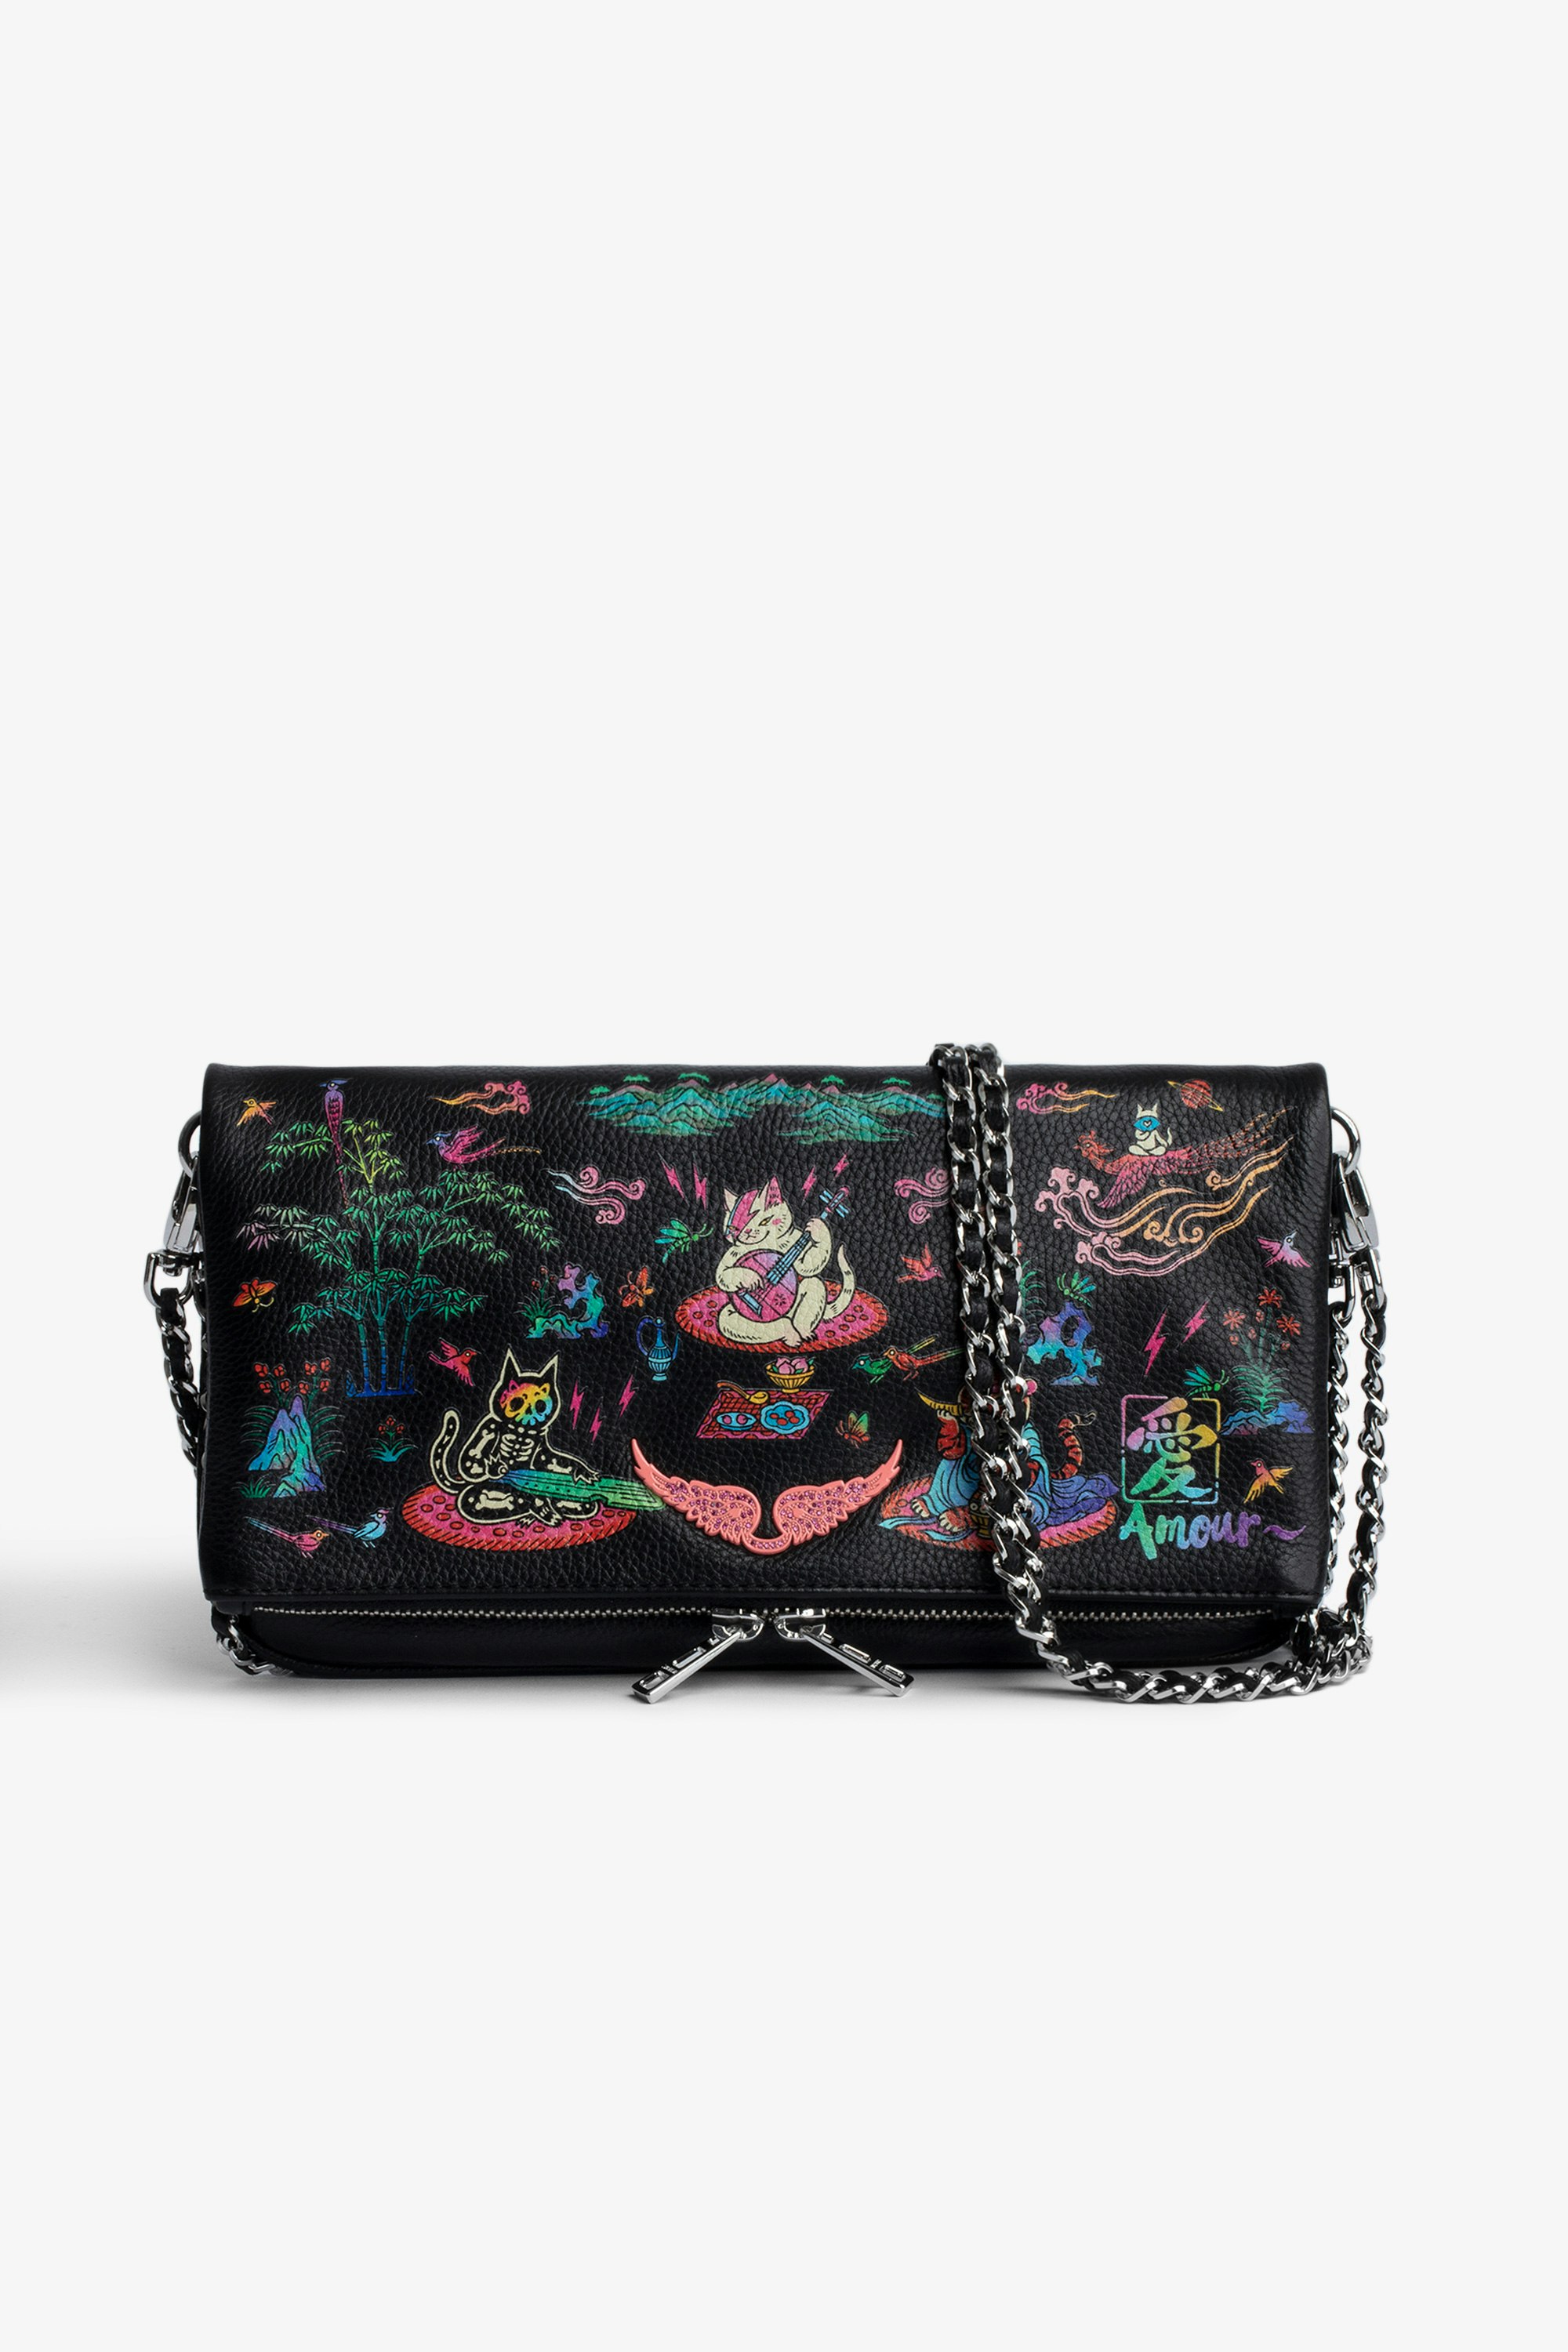 Rock Art Print Clutch Women’s black leather clutch with exclusive print for the brand’s 25th anniversary 